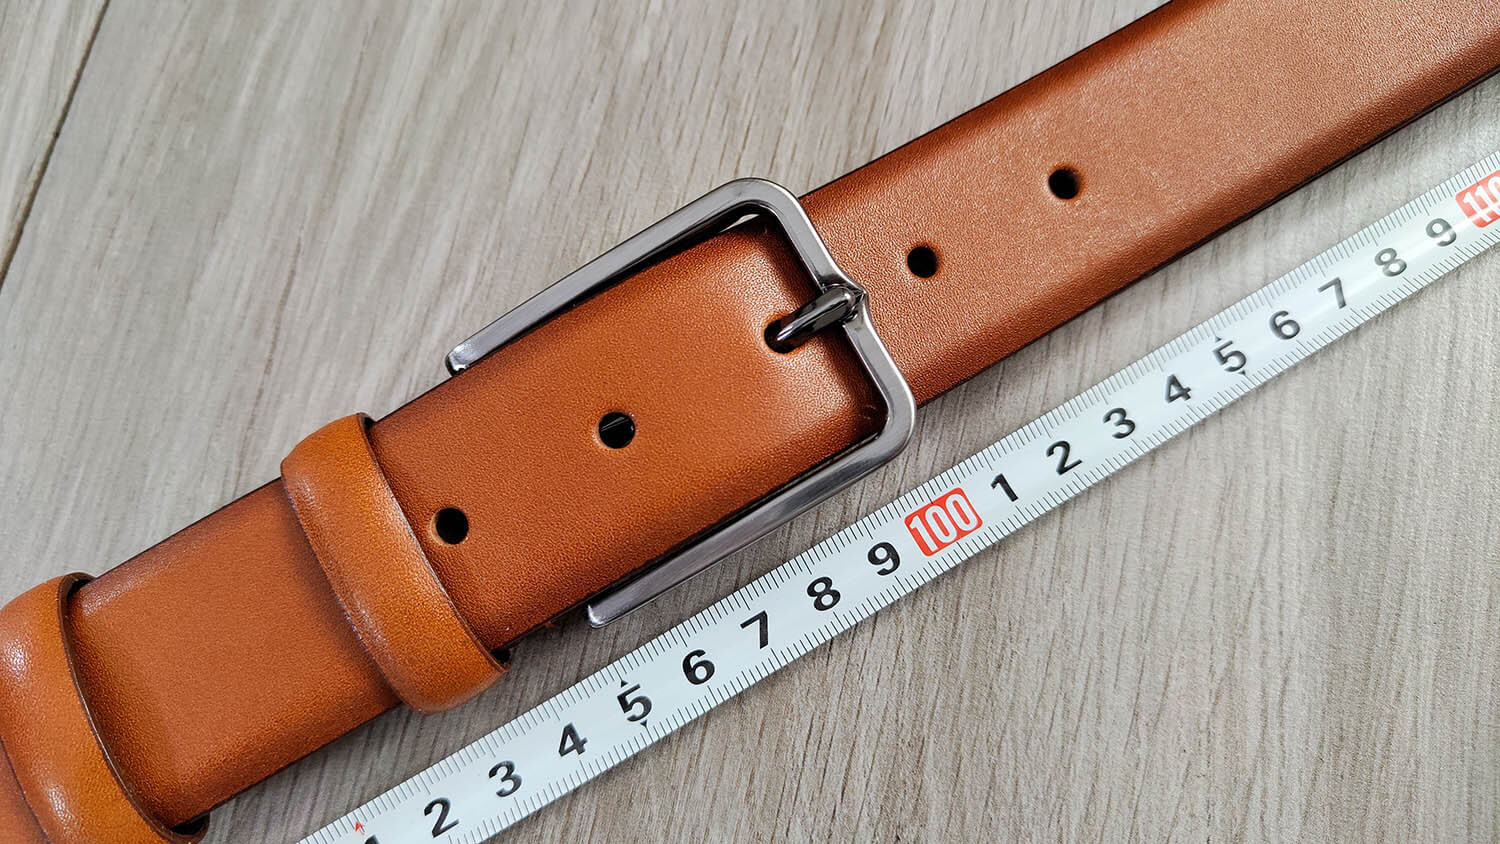 Belt Sizing Chart  How to Get a Belt That Fits Perfectly